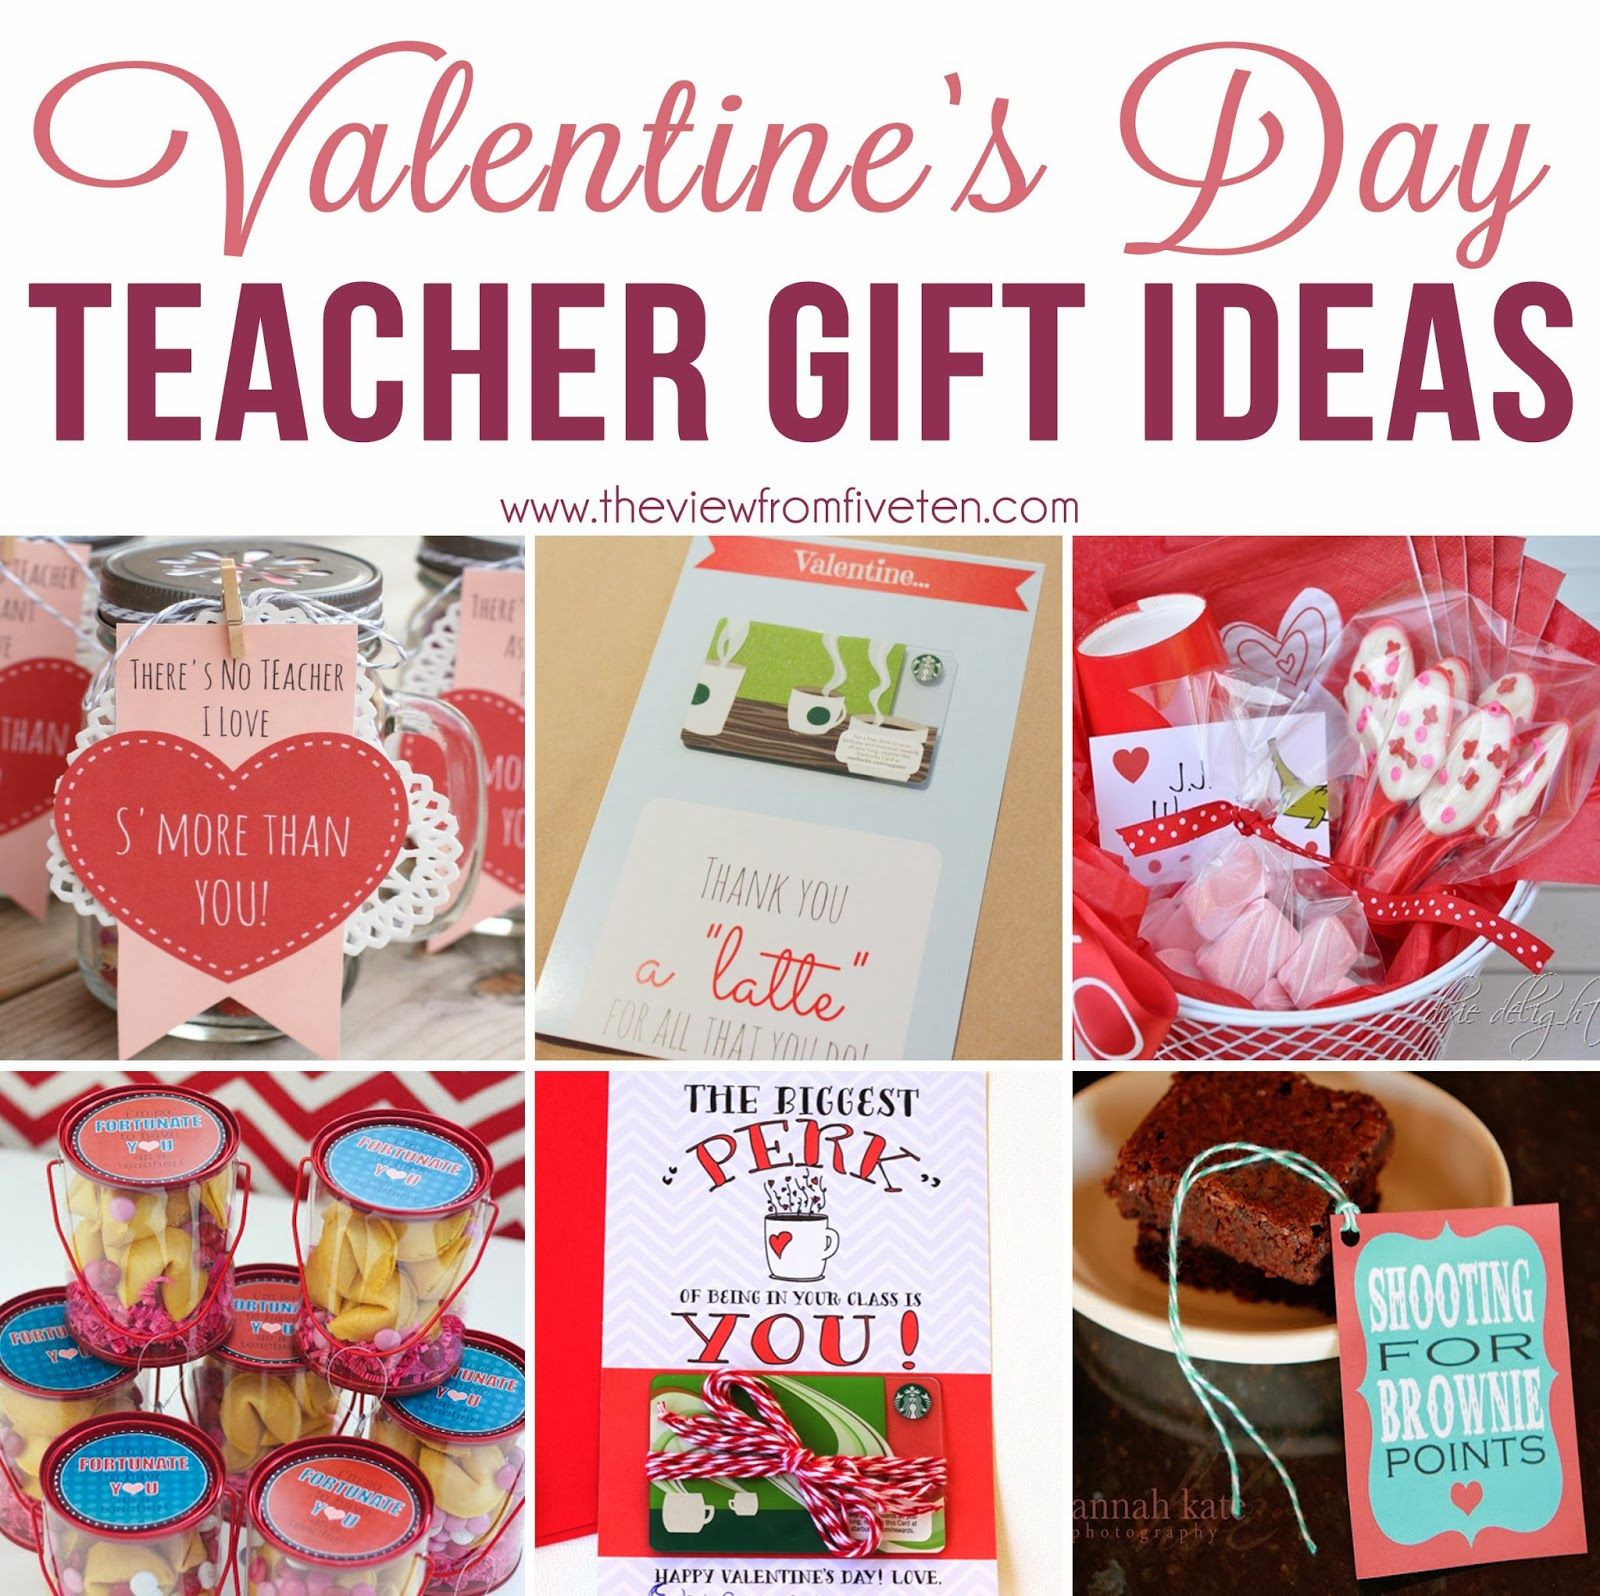 Valentine'S Day Gift Ideas For Teachers
 The View From 510 Valentine s Day Gift Ideas for Teachers